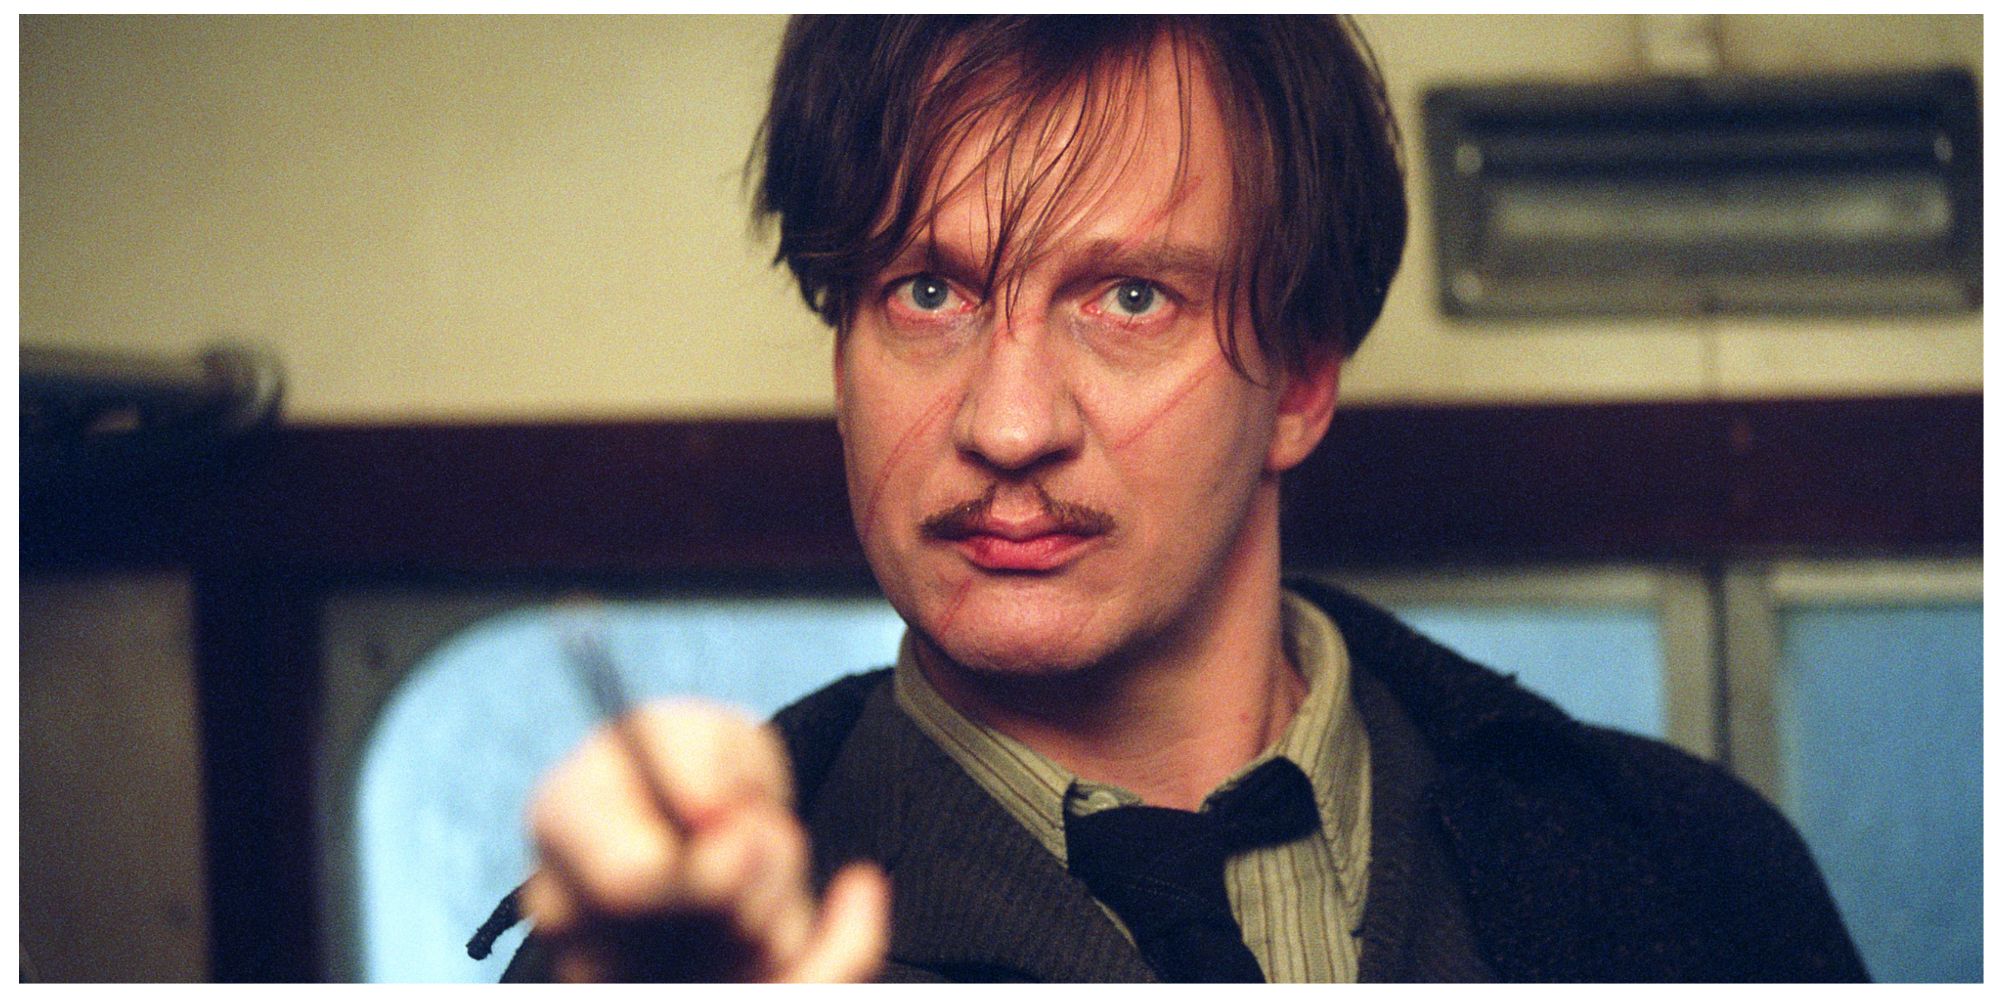 Remus Lupin in Harry Potter and the Prisoner of Azakaban